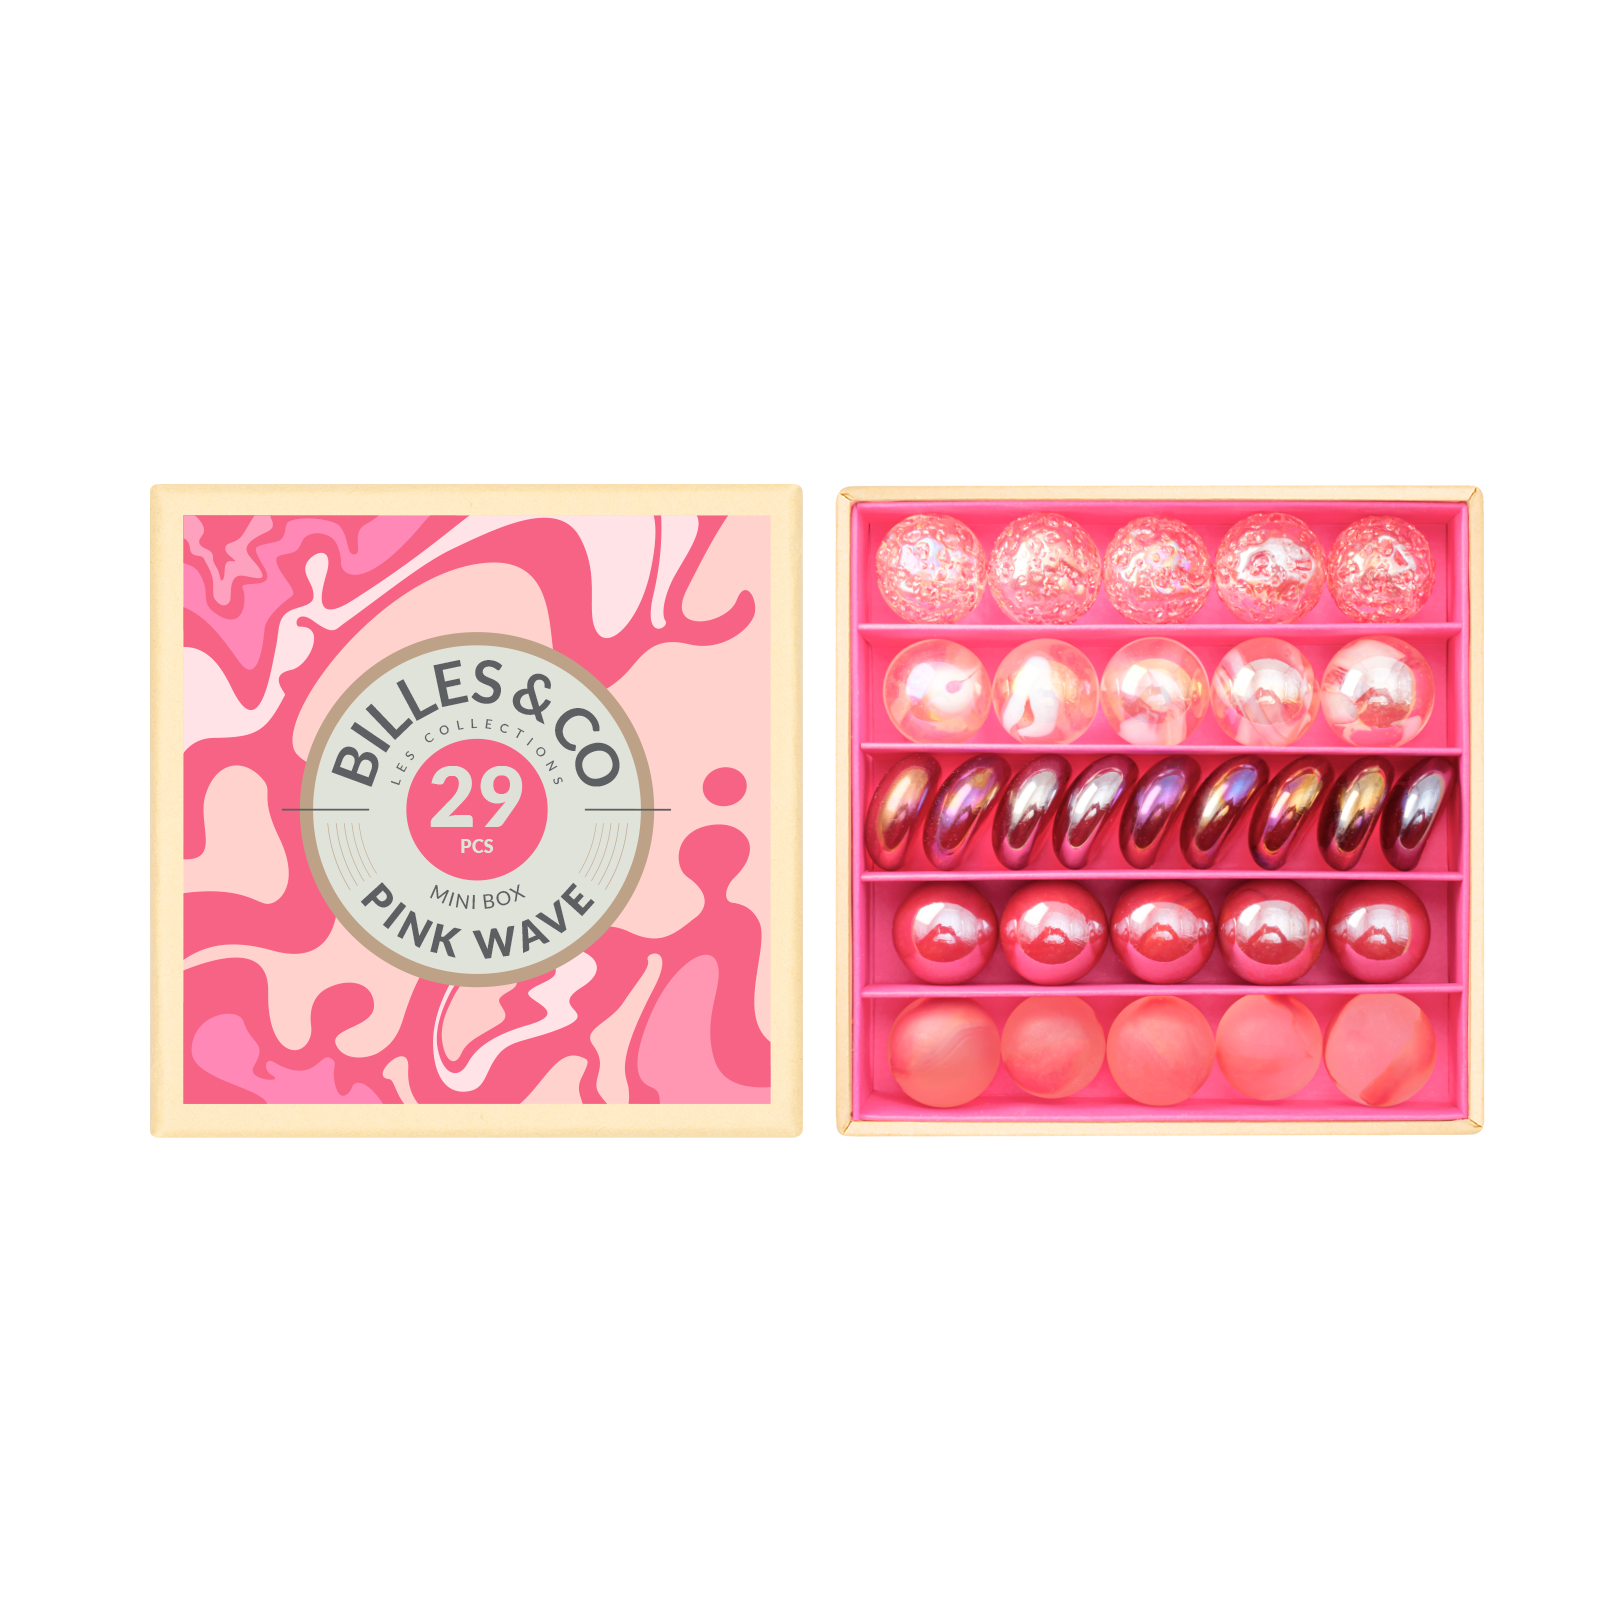 Pink Wave Marbles Mini Box by Billes & Co